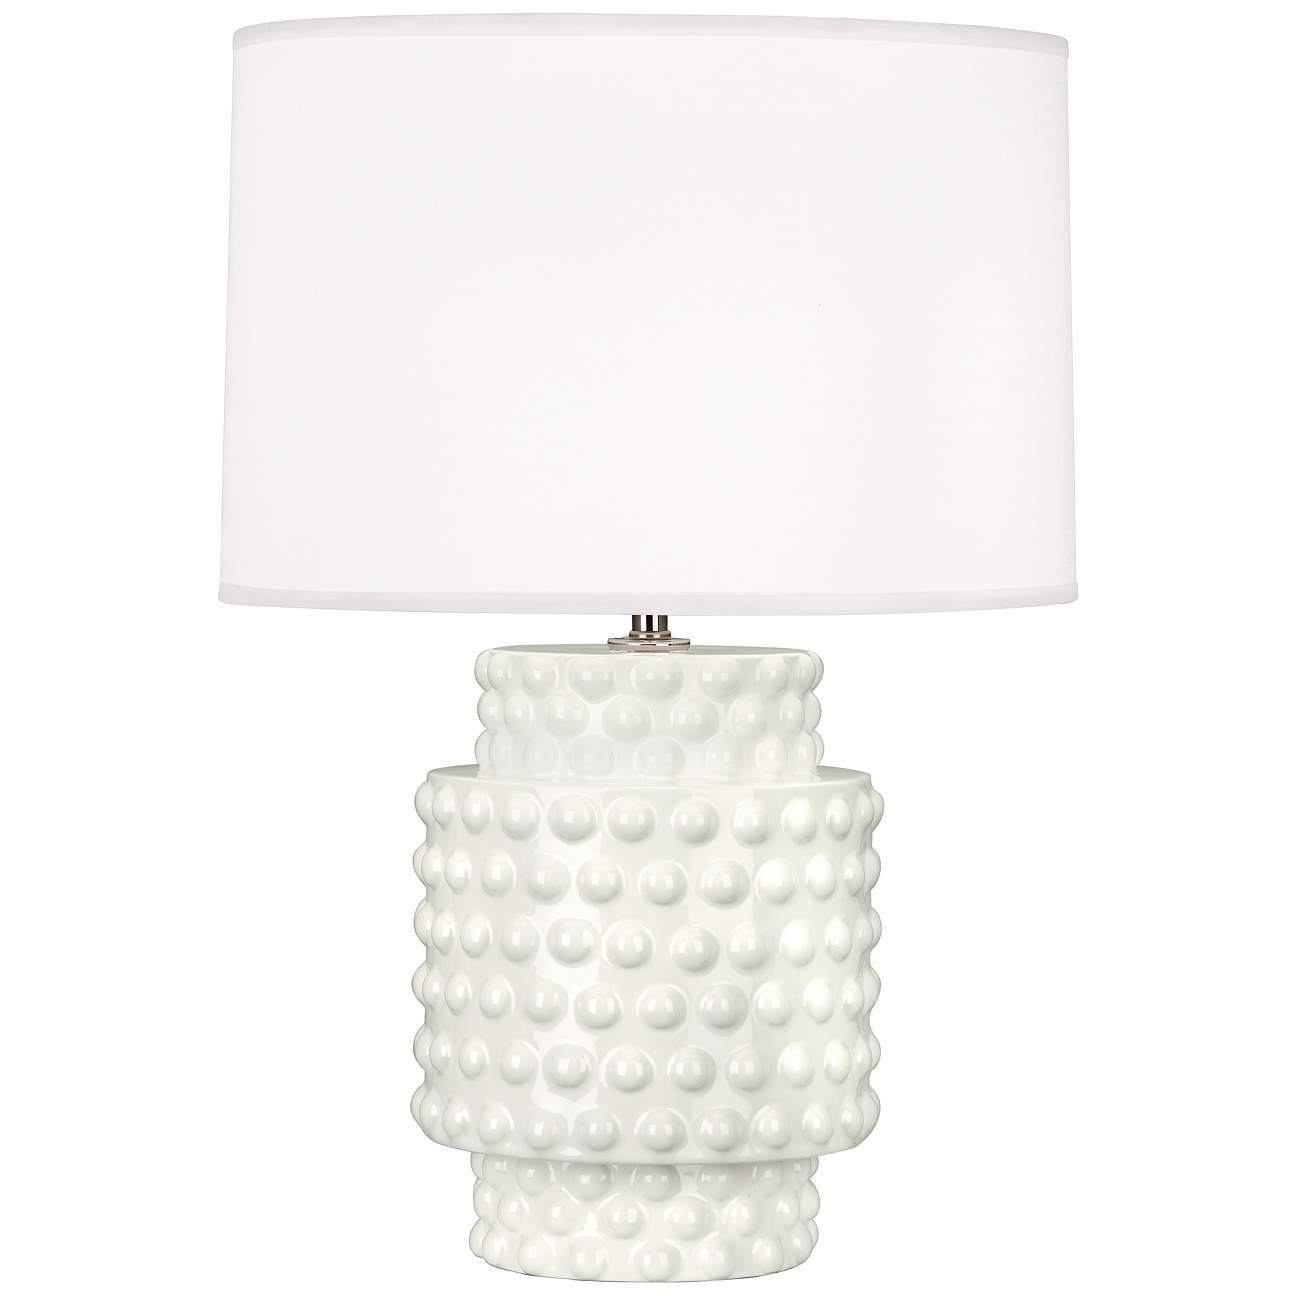 Robert Abbey Dolly Lily Ceramic Accent Table Lamp | Lamps Plus